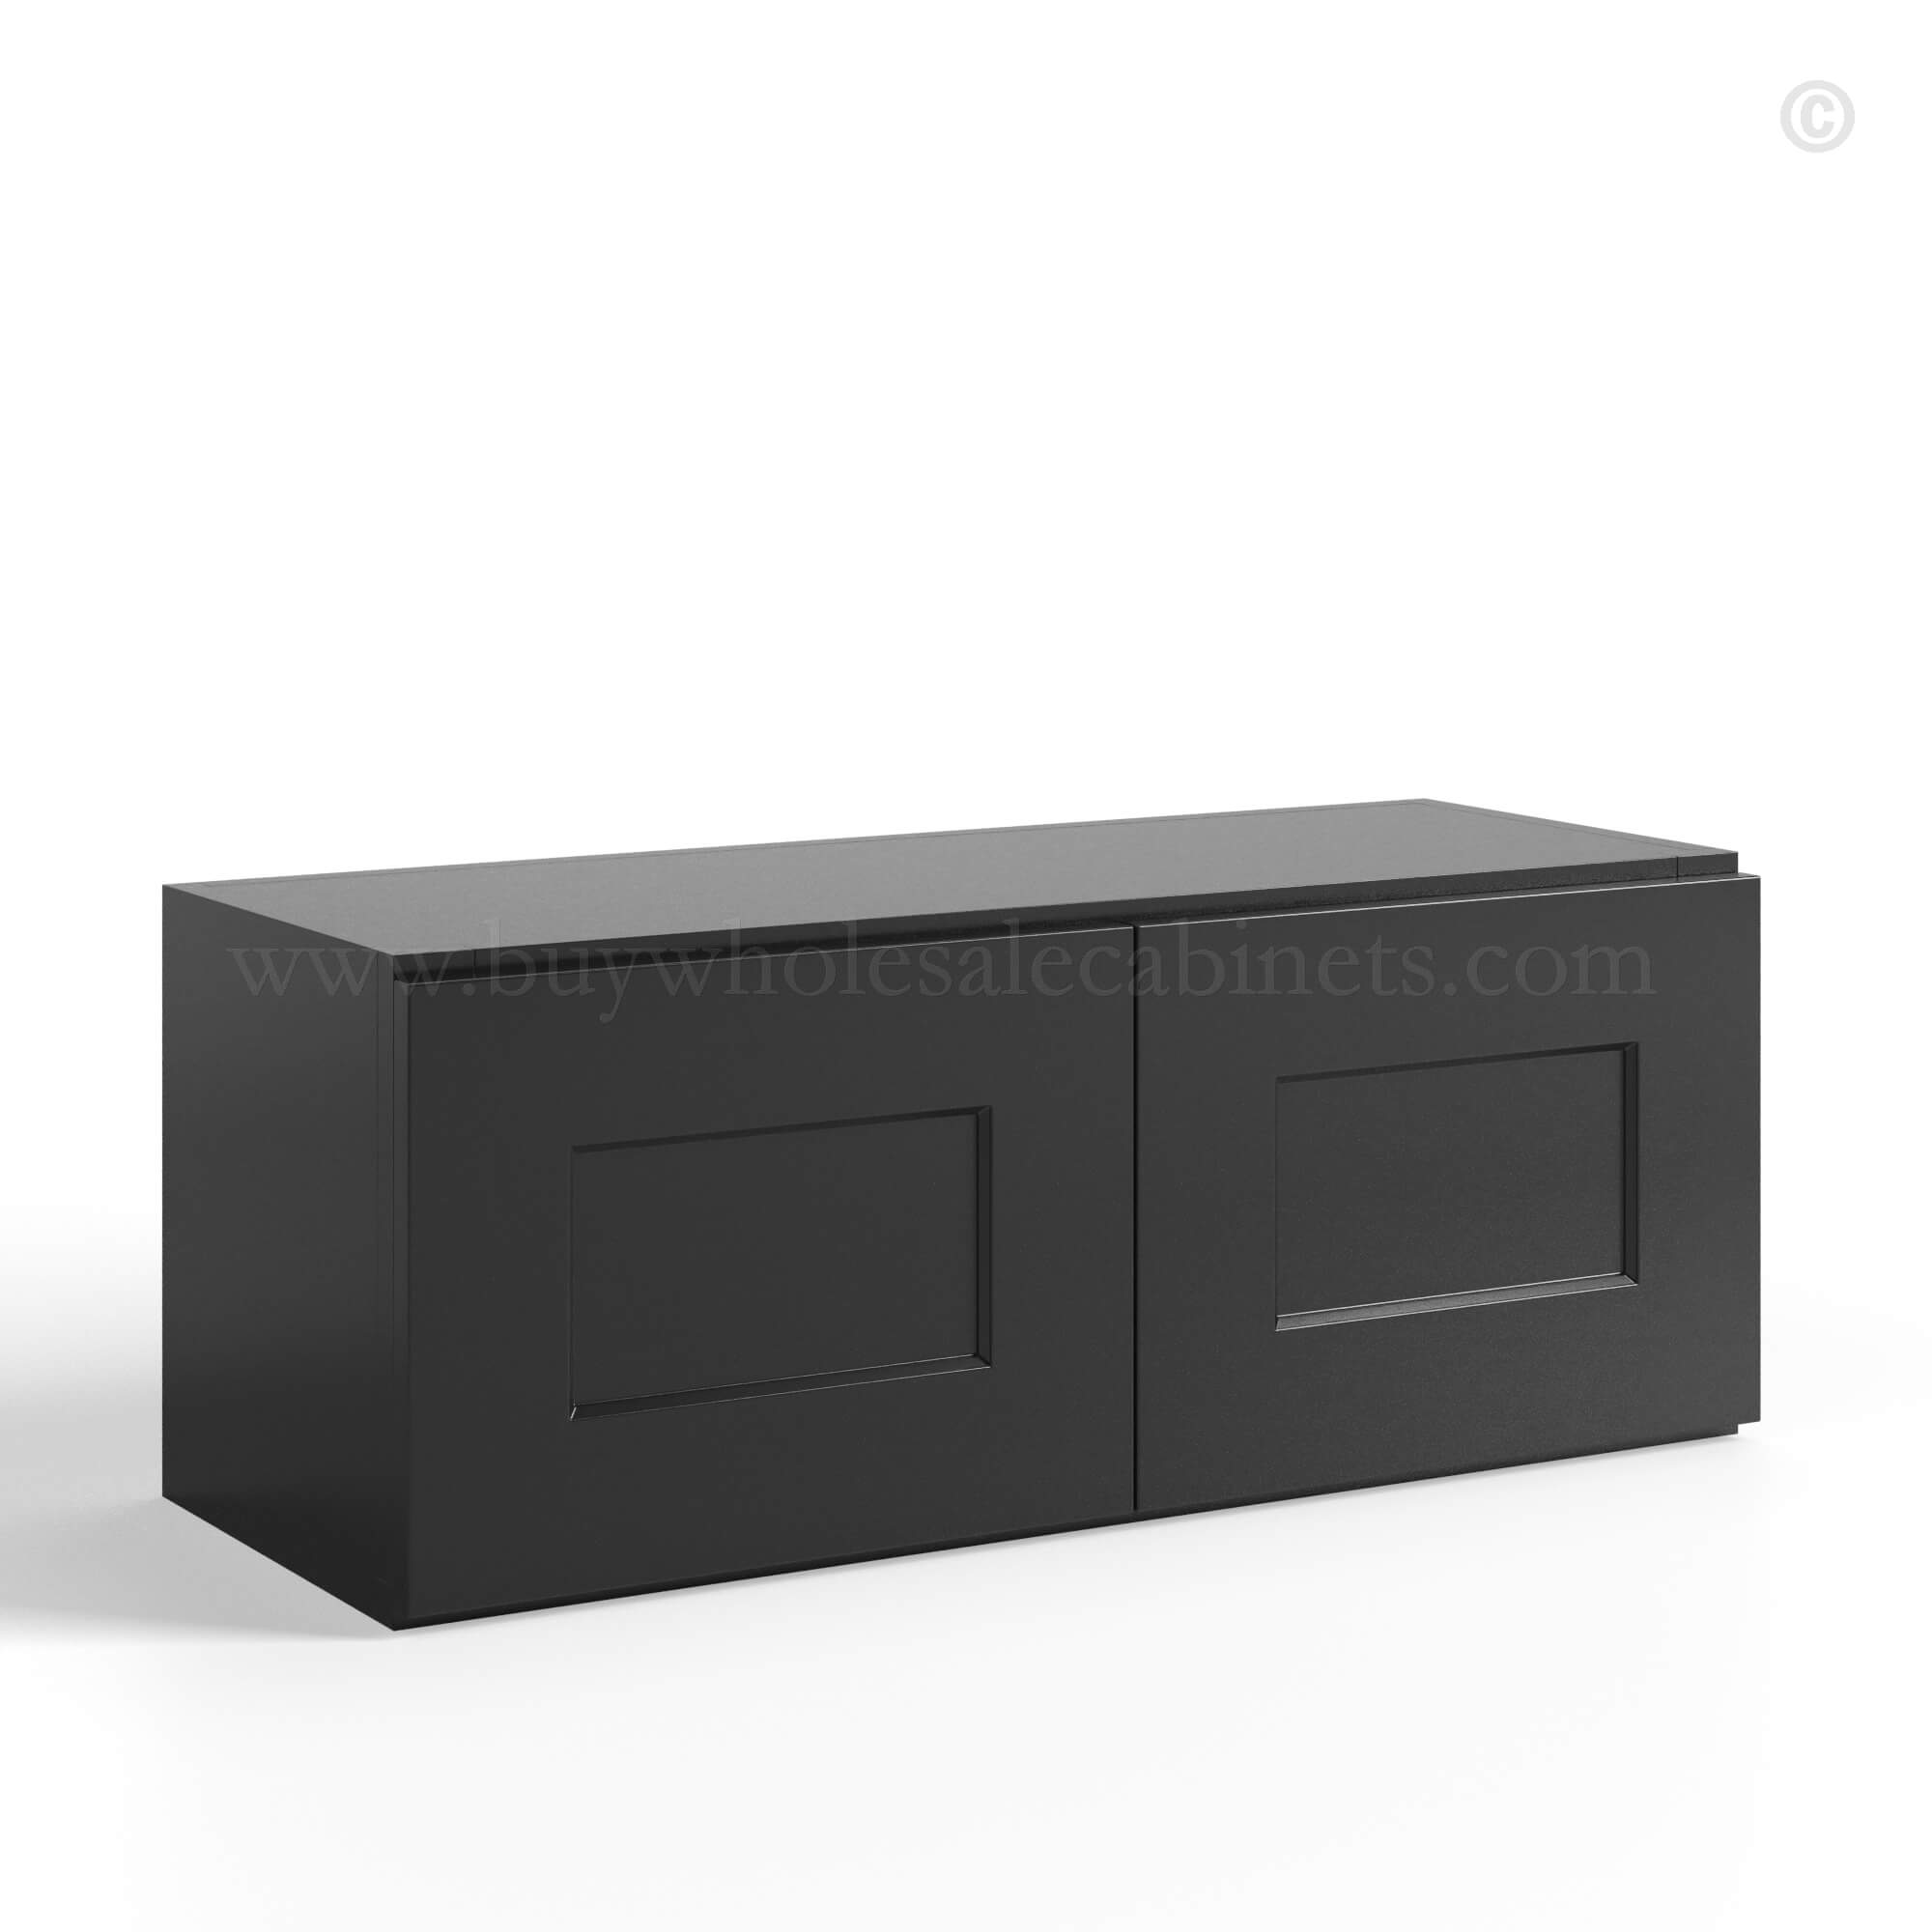 Black Shaker Double Door Wall Cabinets, rta cabinets, wholesale cabinets